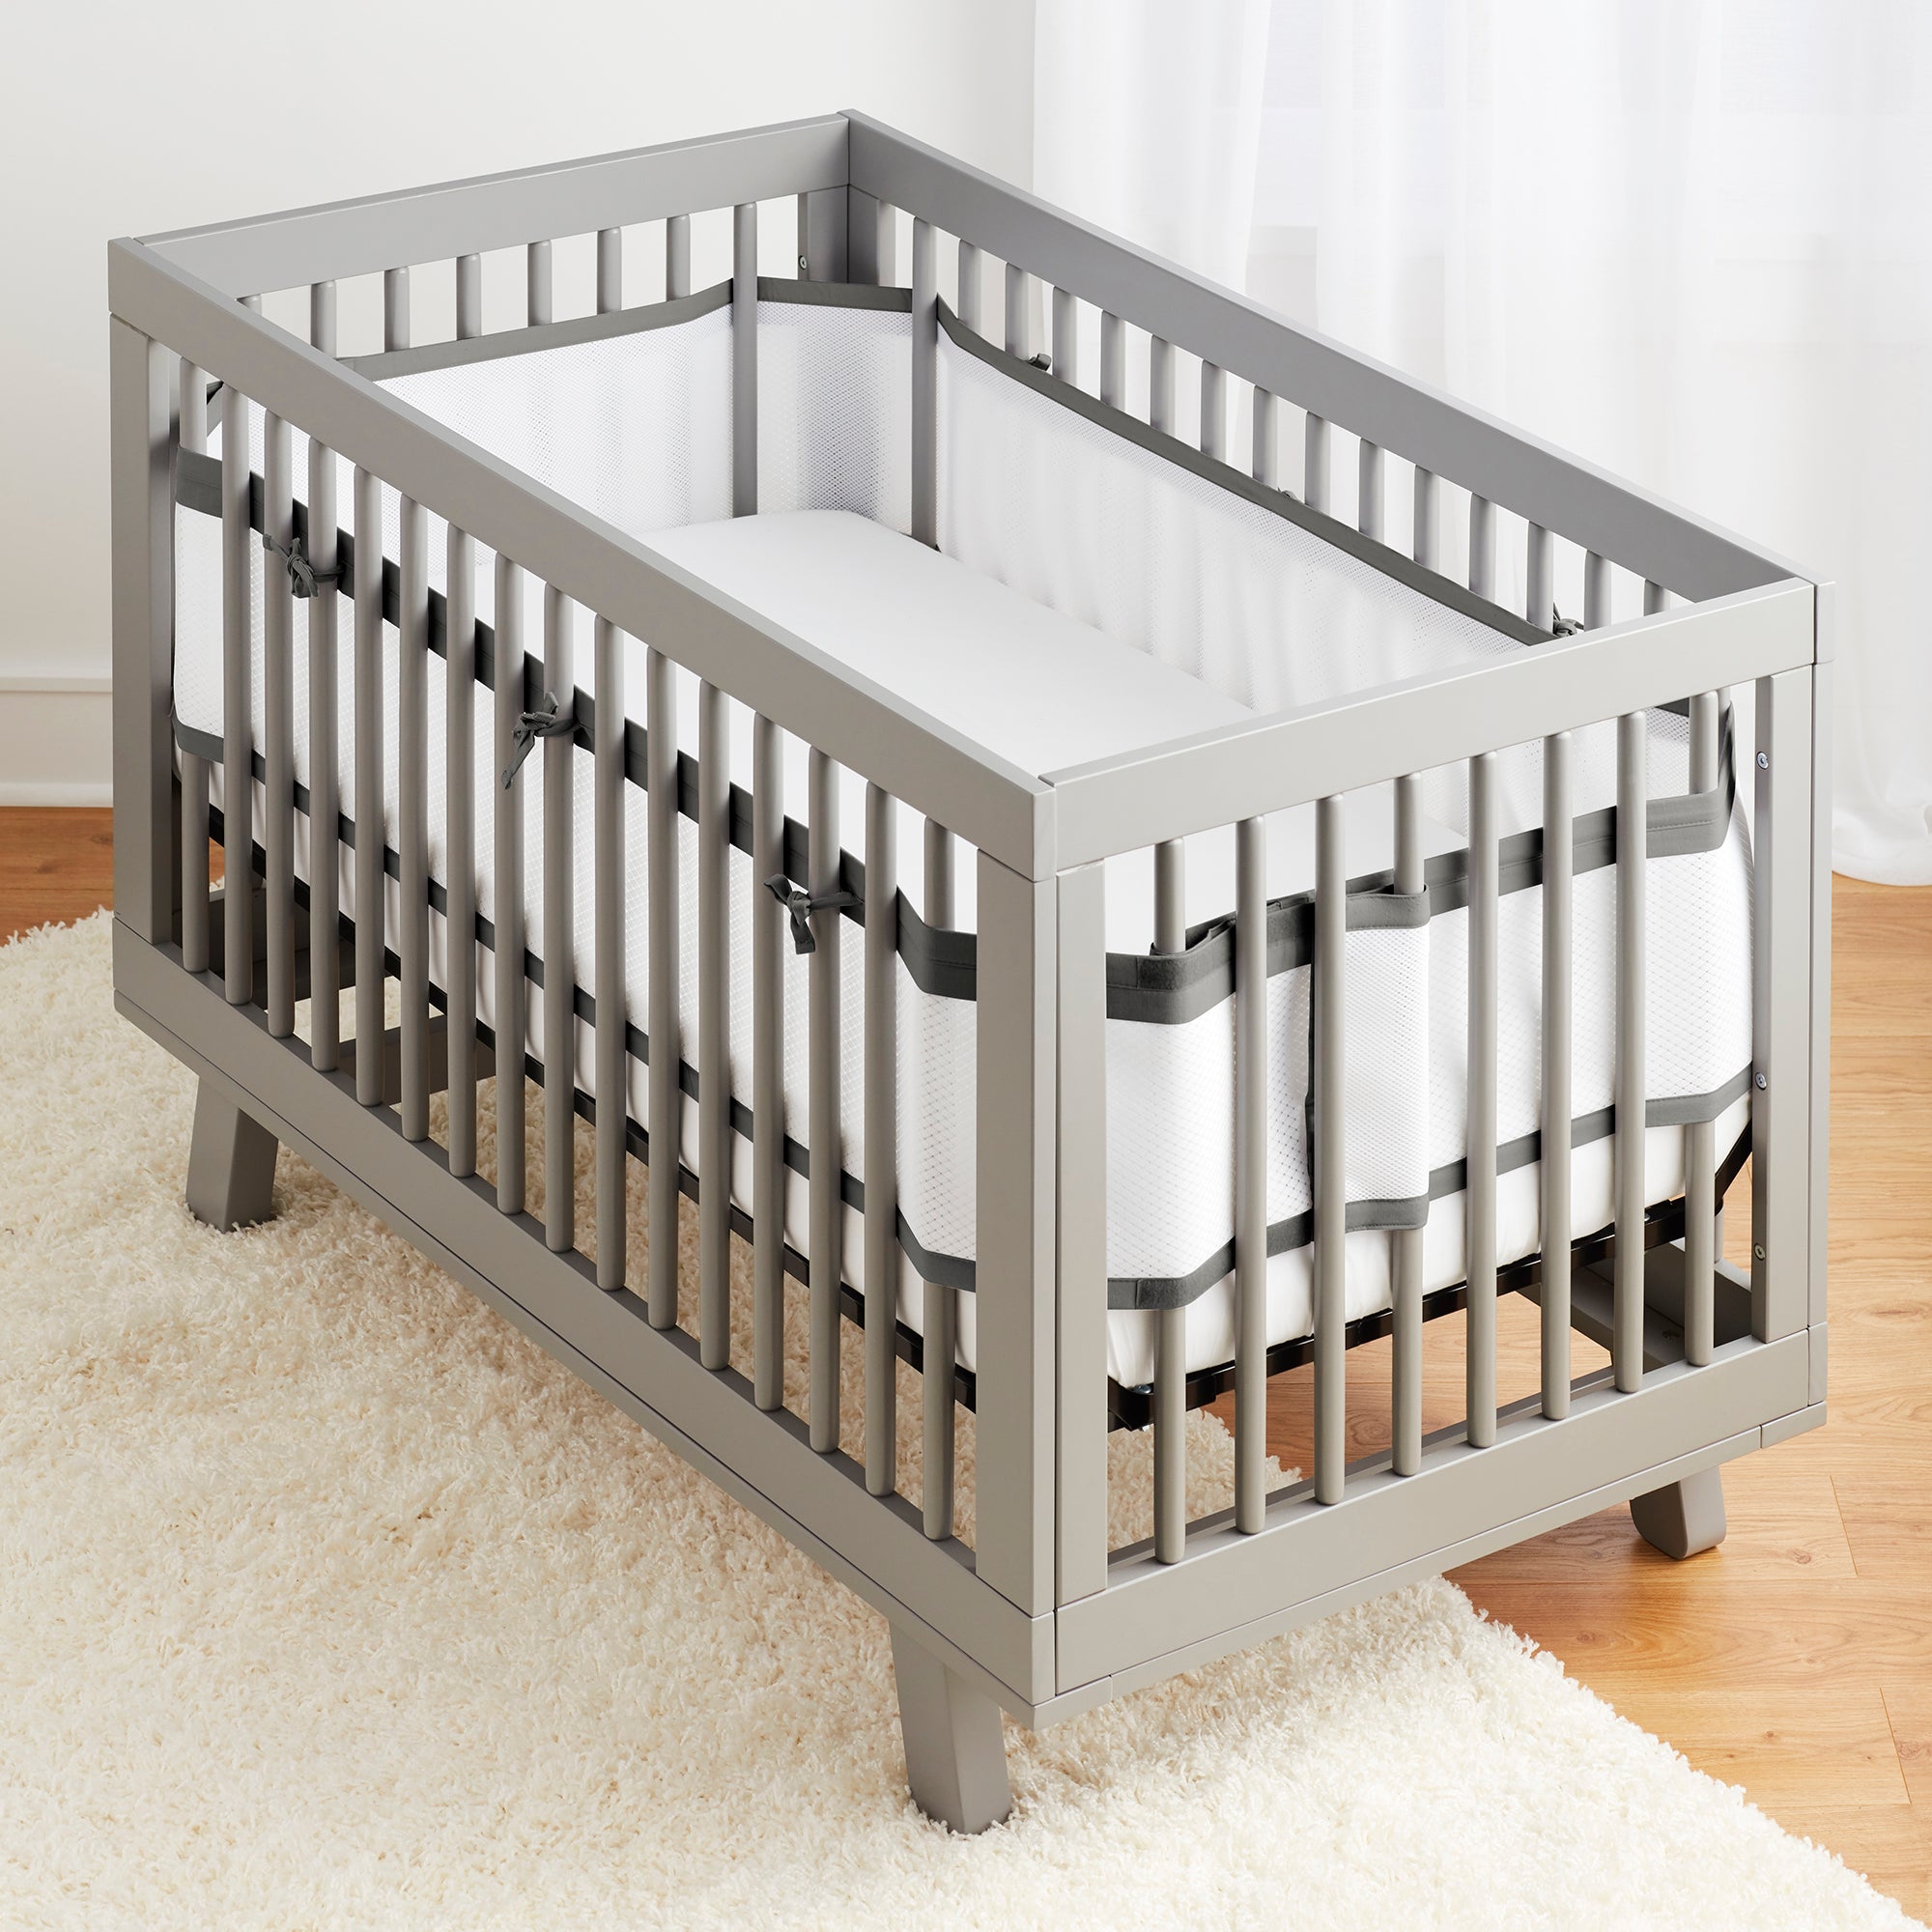 Breathable™ Mesh Liner for Full-Size Cribs, Deluxe 4mm Mesh, Charcoal –  BreathableBaby